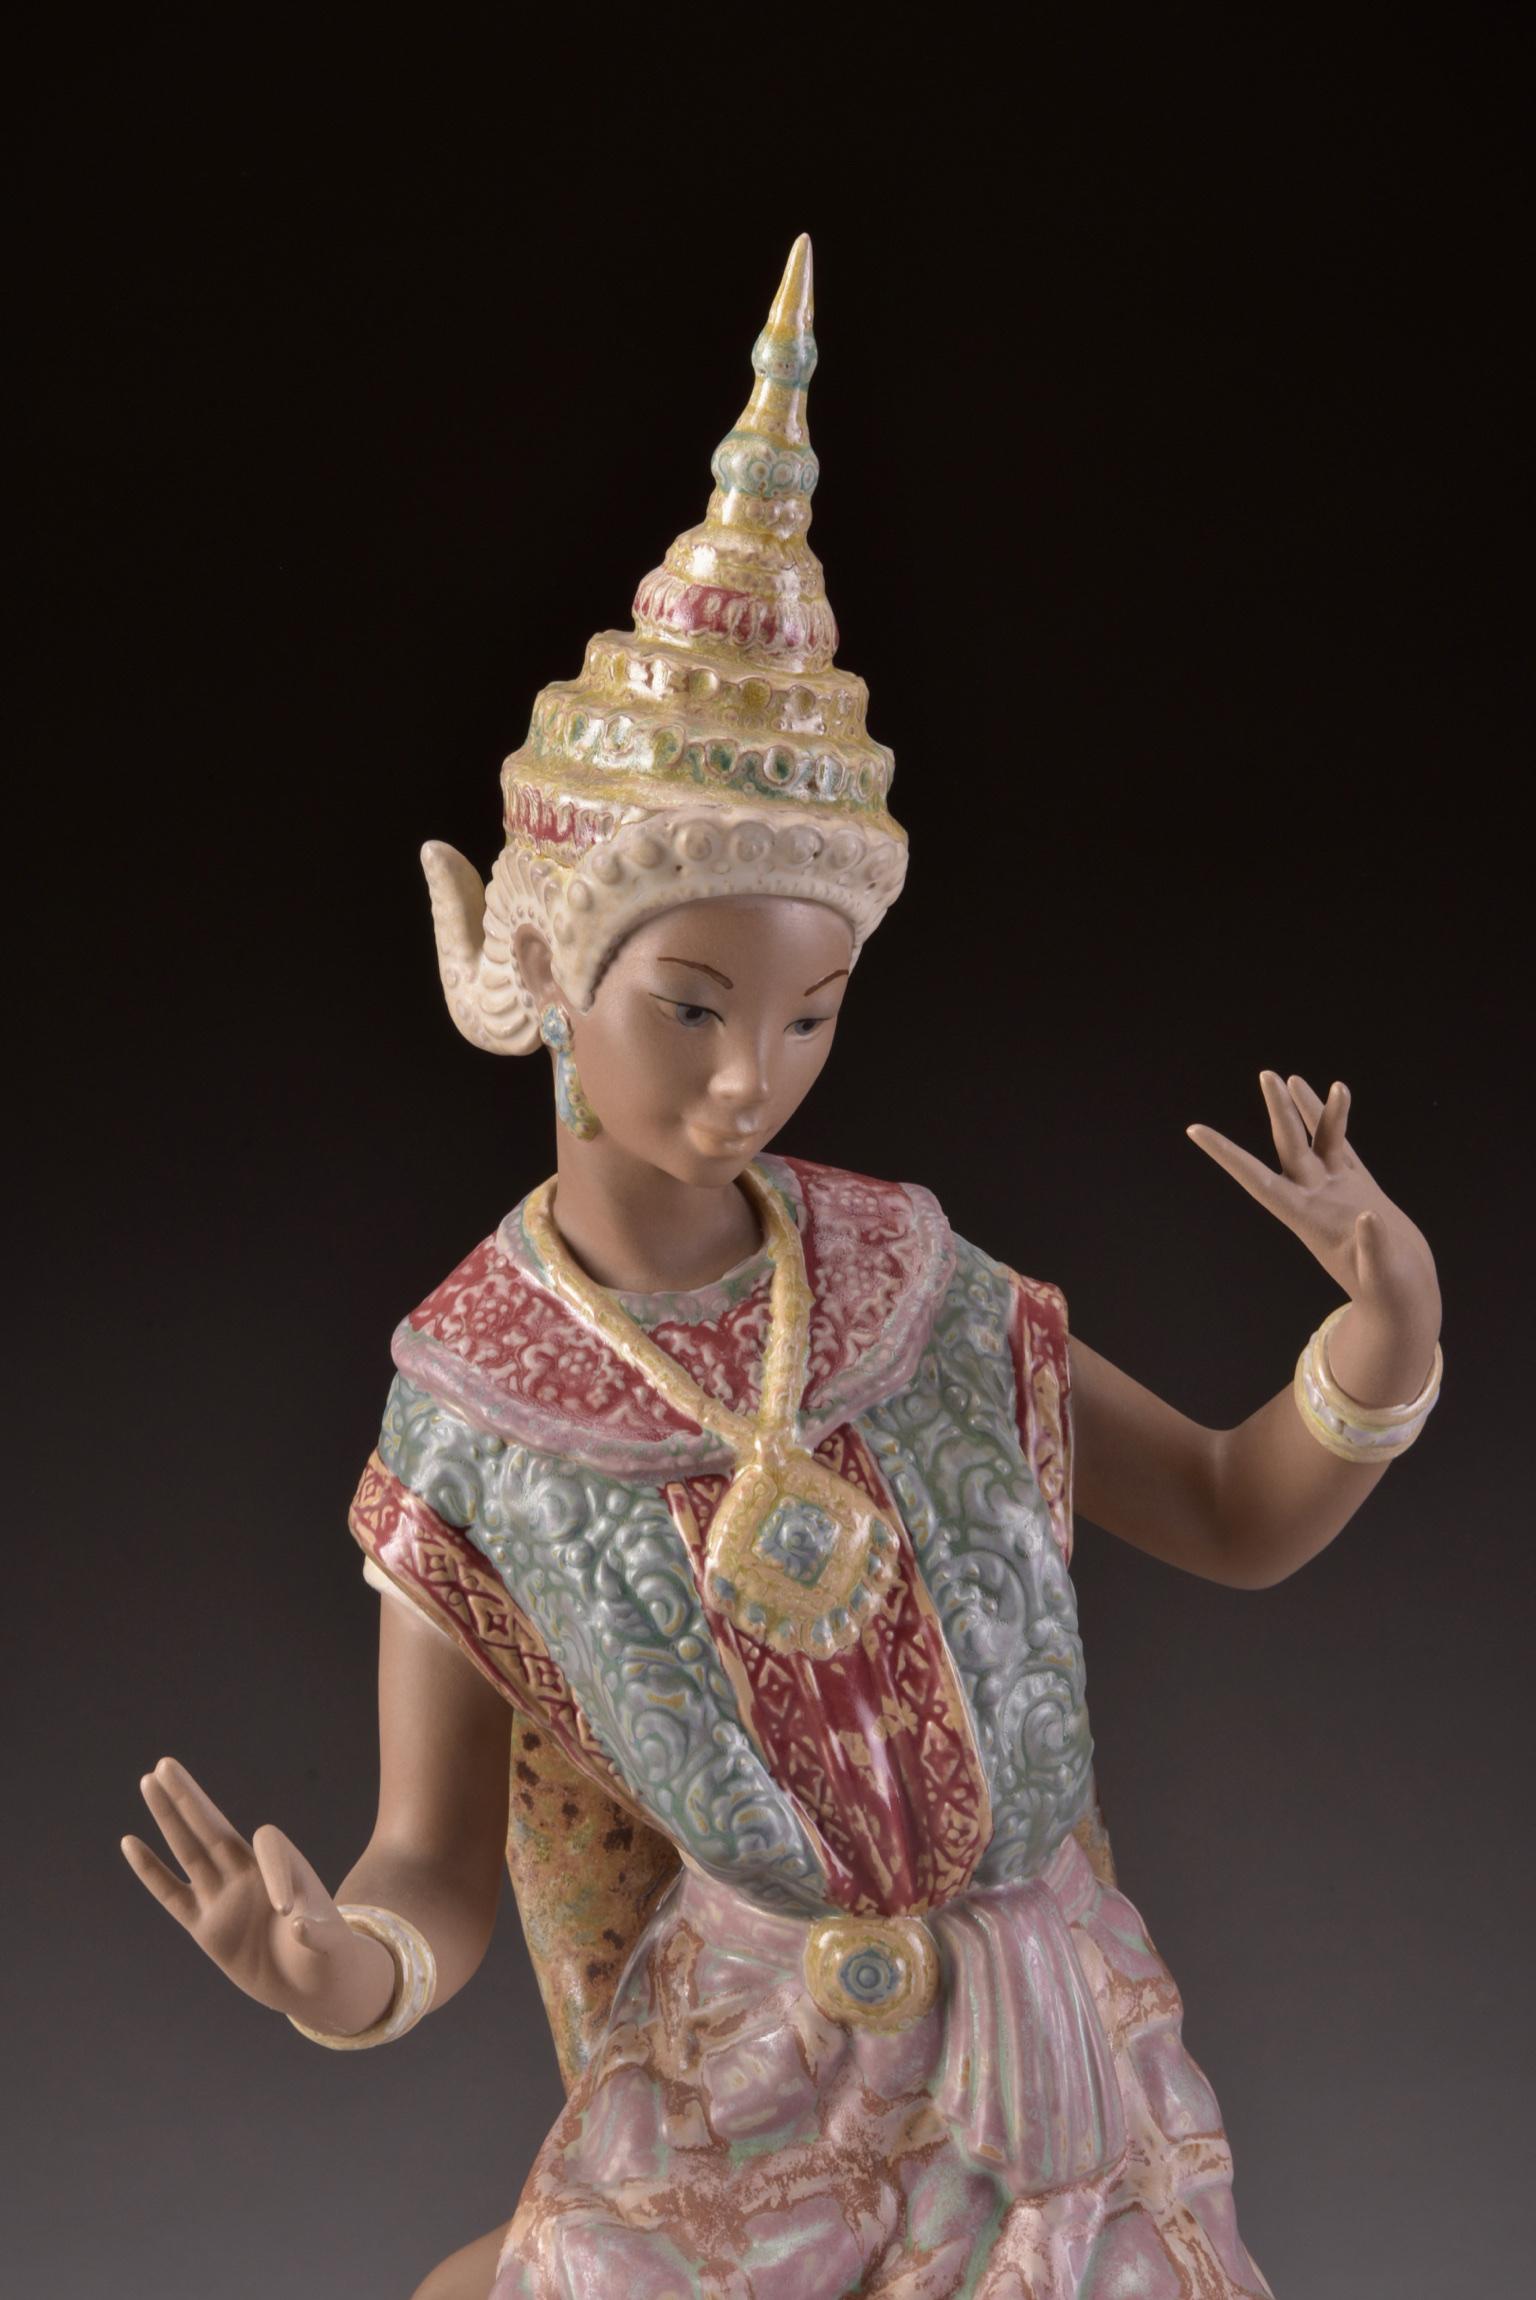 Wonderful figurine depicting a Thai dancer in traditional clothing with gorgeous soft colors and in perfect condition.